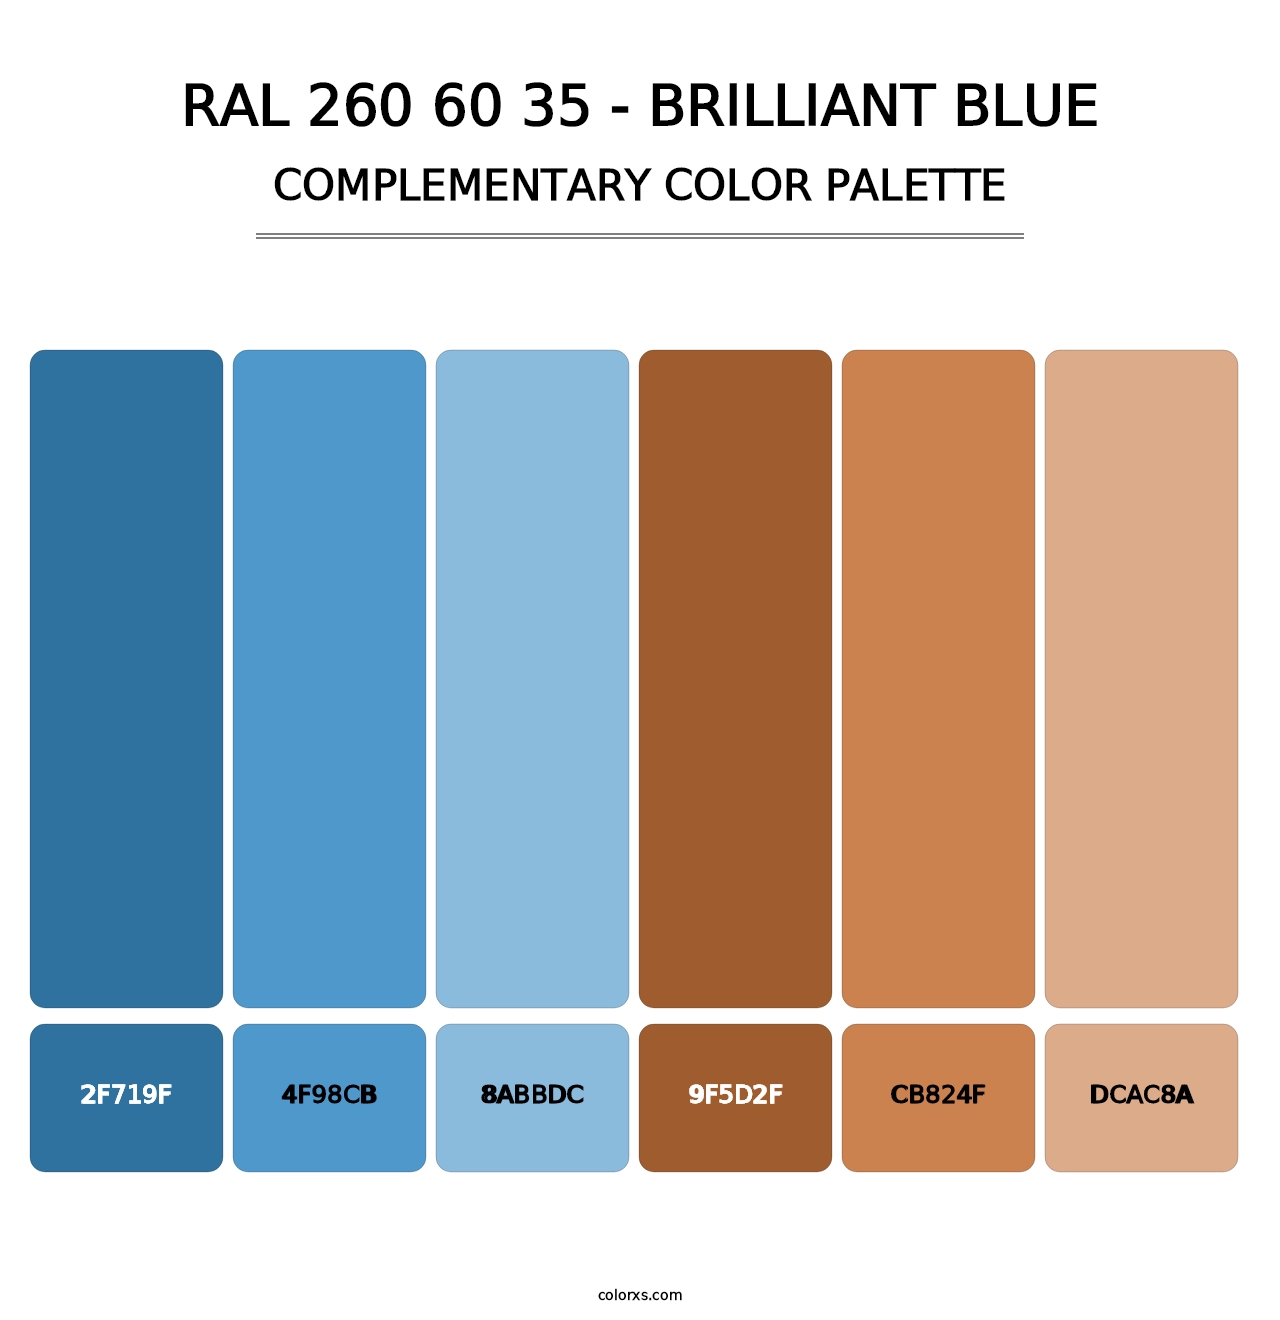 RAL 260 60 35 - Brilliant Blue - Complementary Color Palette